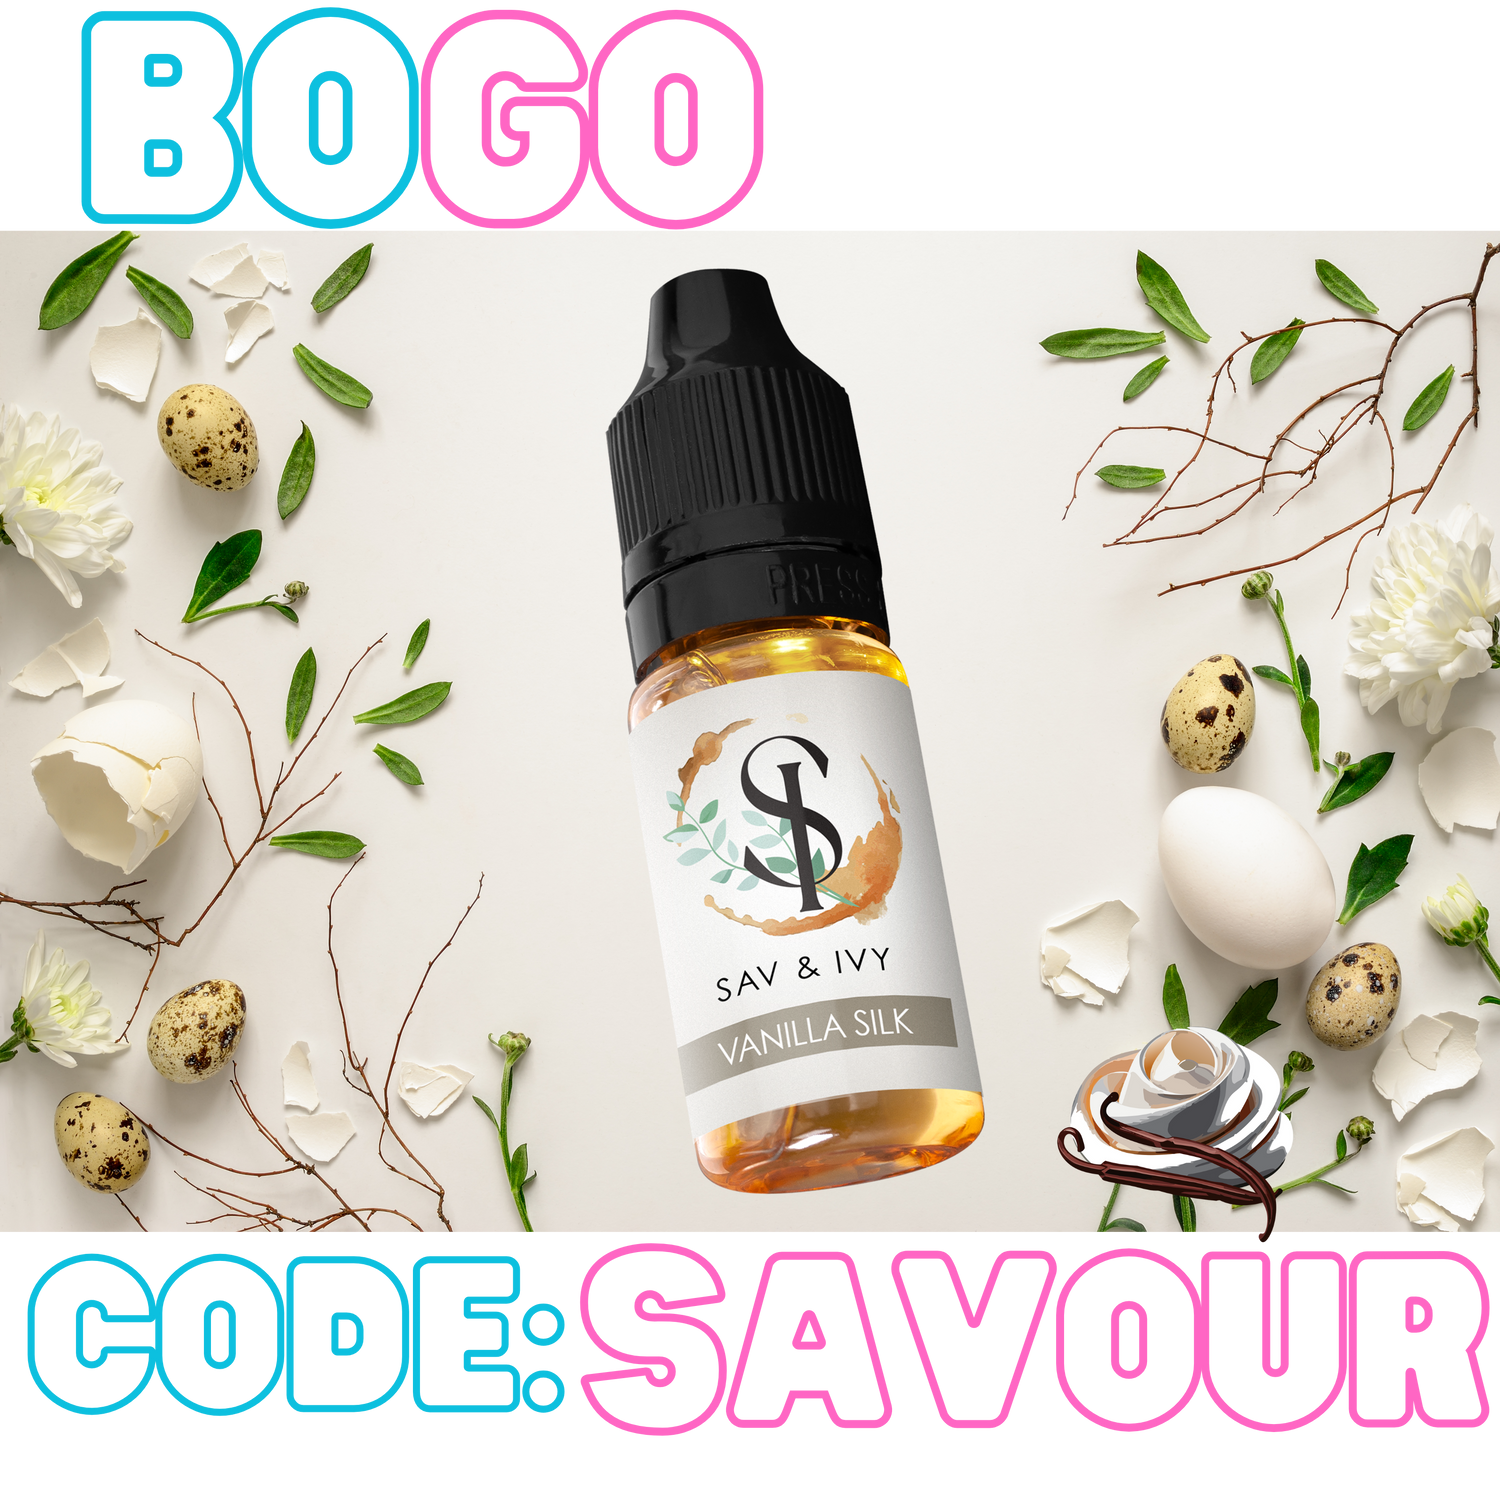 10ml bottle of Sav and Ivy Vanilla Silk Coffee Flavoring on a background of spring flowers, eggs and eggshells